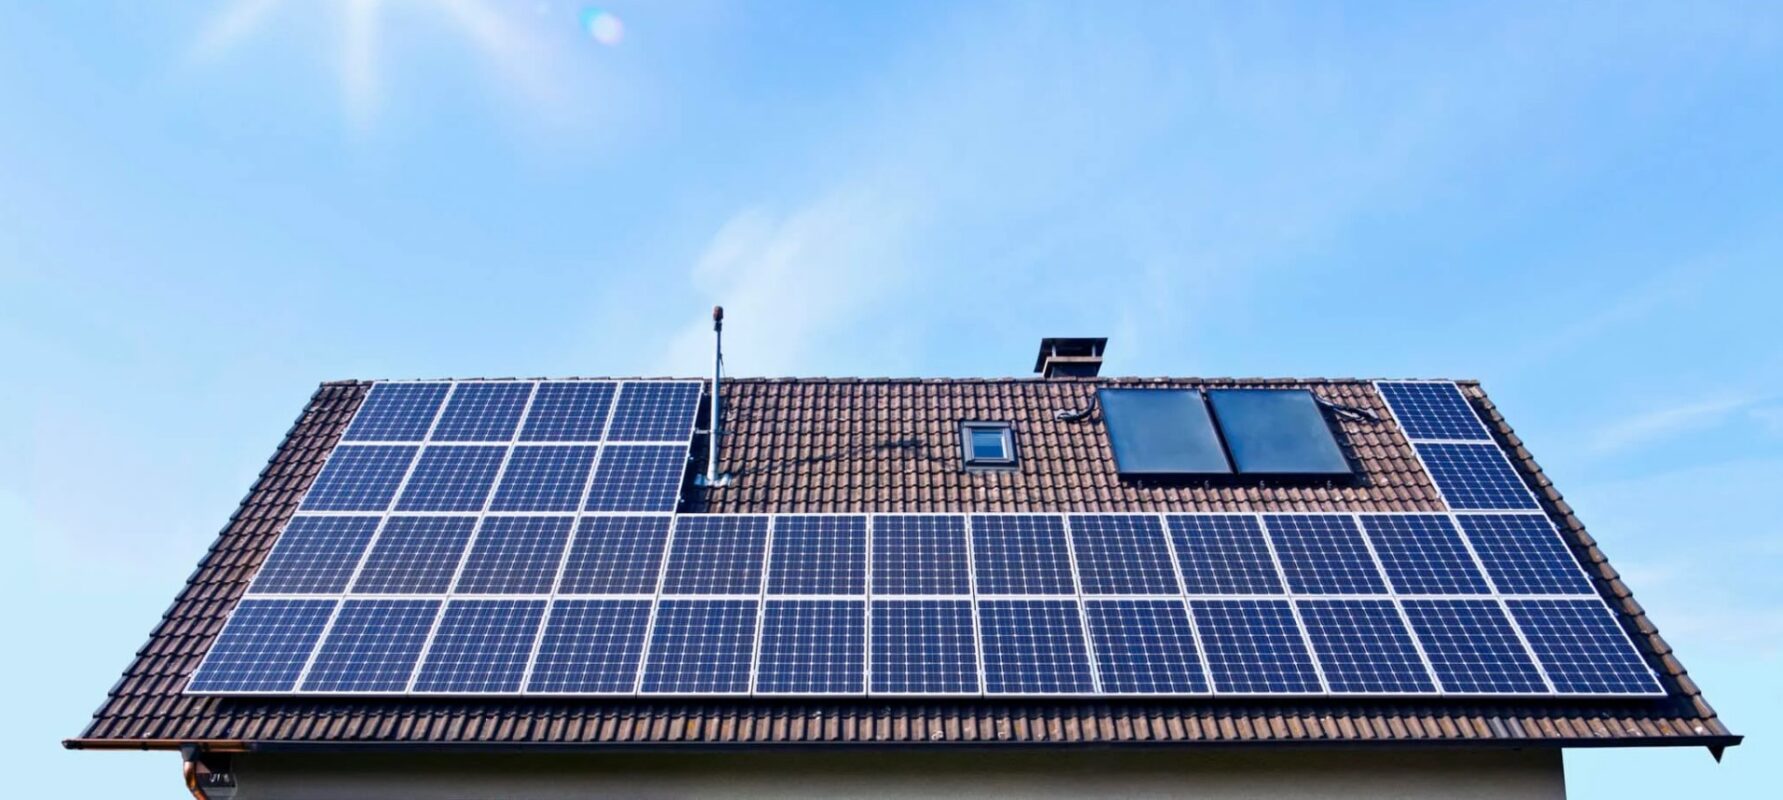 Calculate Your Solar Panel Payback Period (How Long To Recoup the Costs?)